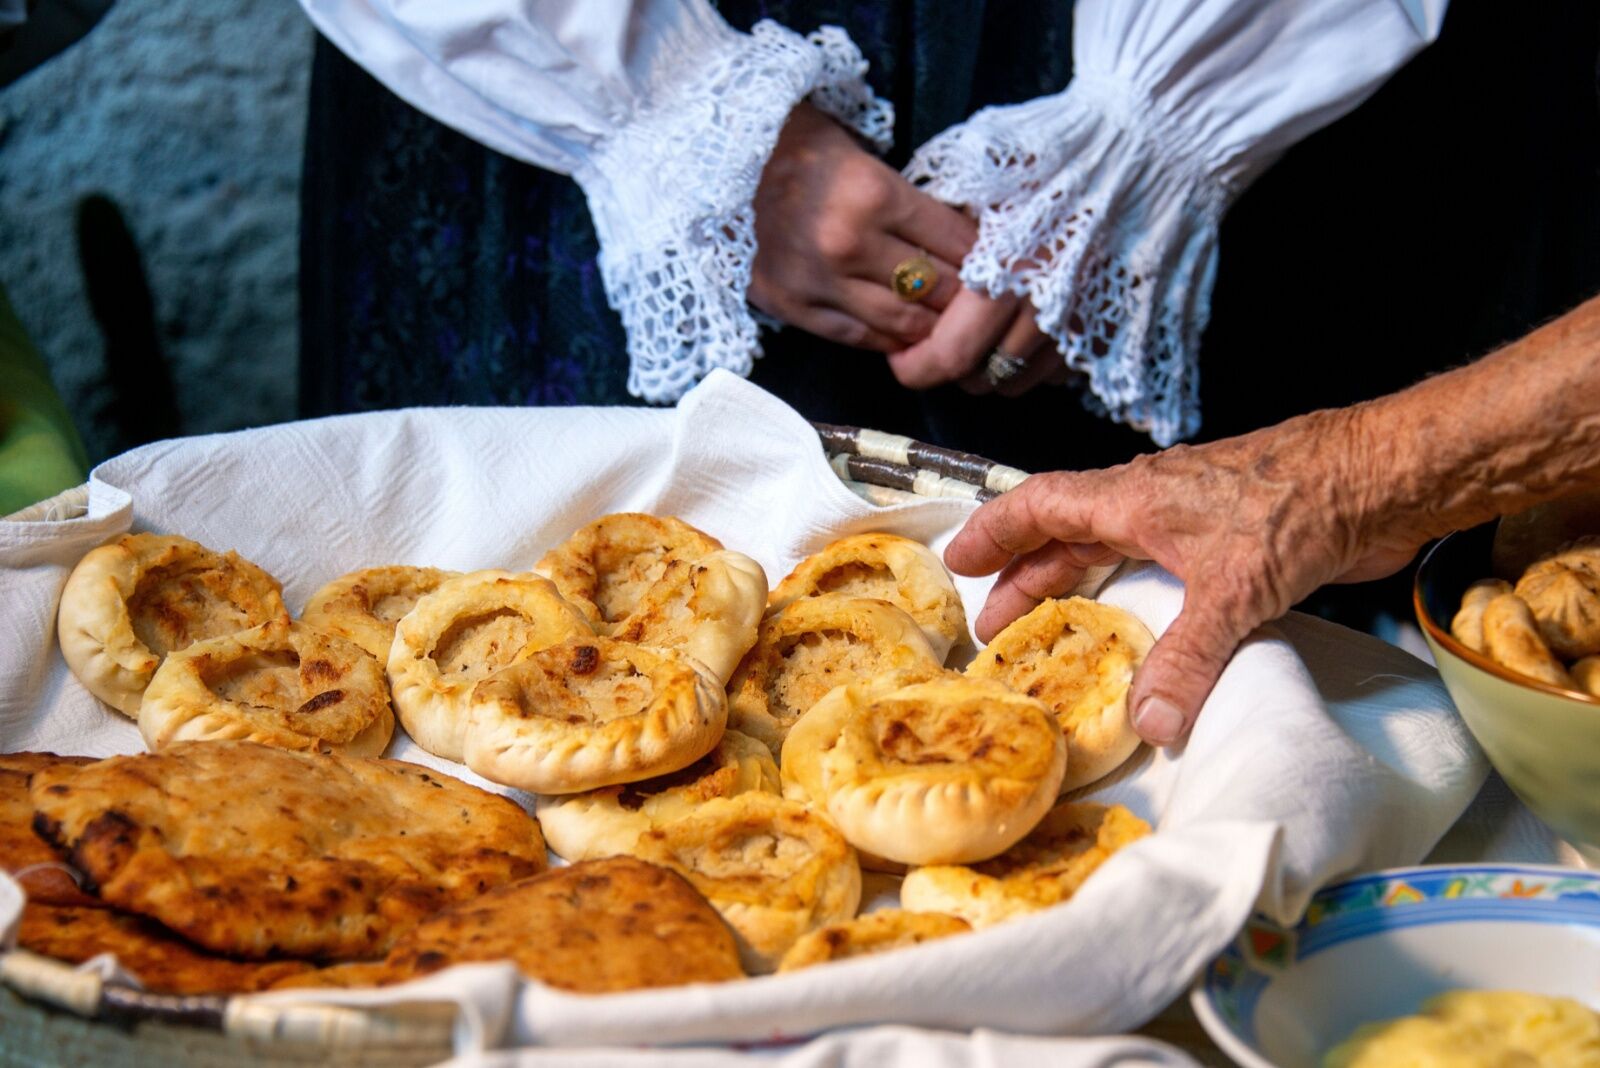 panadas, typical Sardinian savory pies, filled with meat, potatoes and legumes